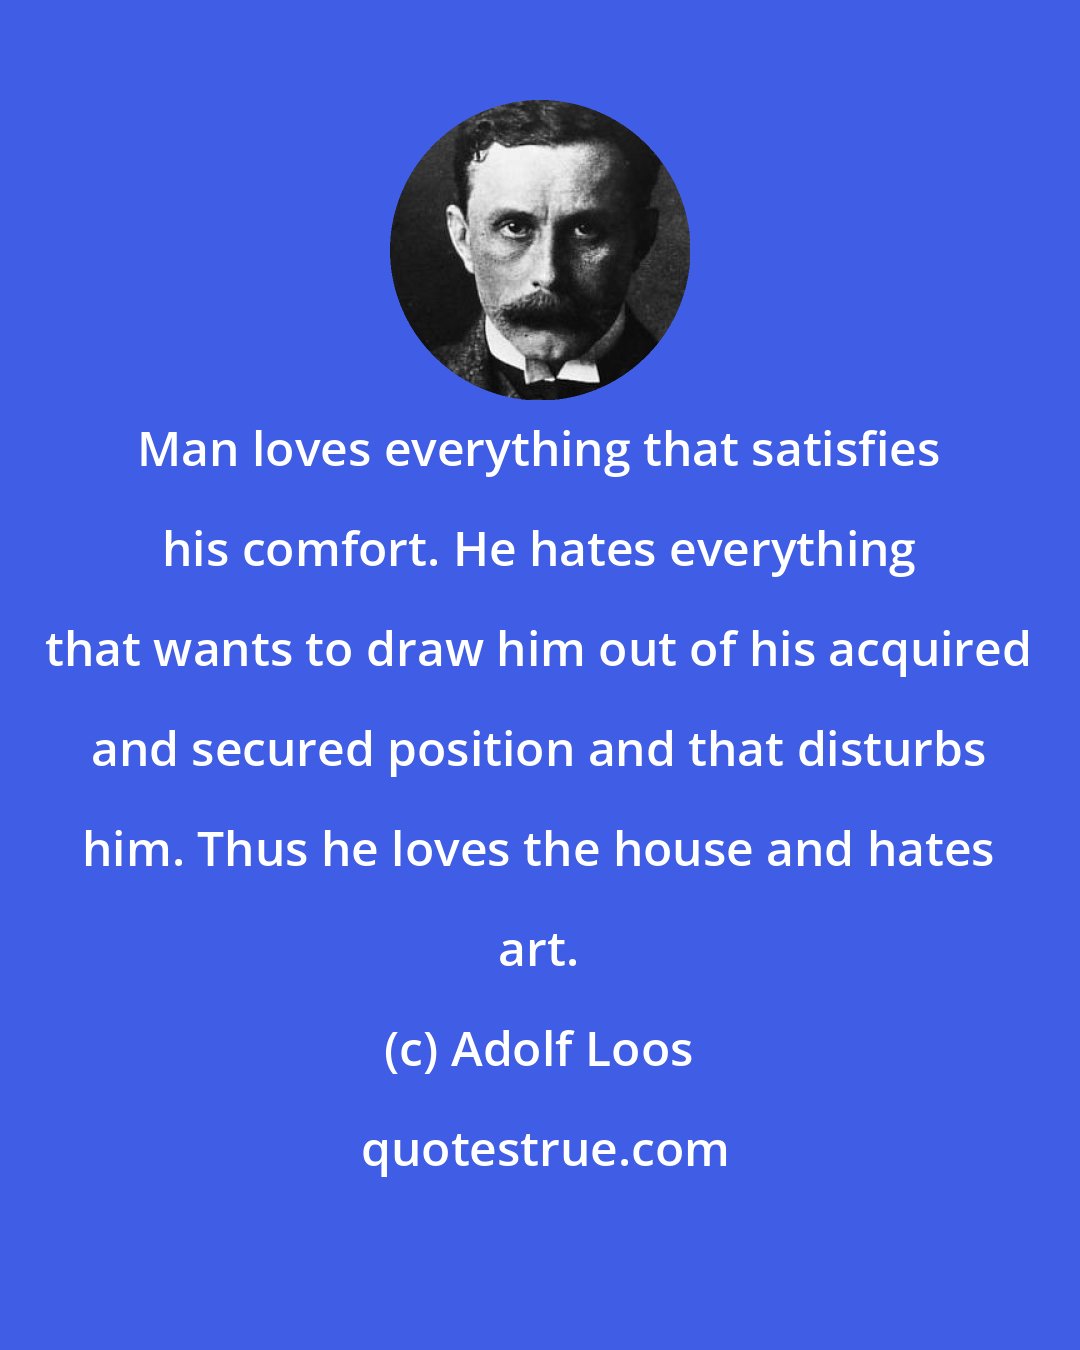 Adolf Loos: Man loves everything that satisfies his comfort. He hates everything that wants to draw him out of his acquired and secured position and that disturbs him. Thus he loves the house and hates art.